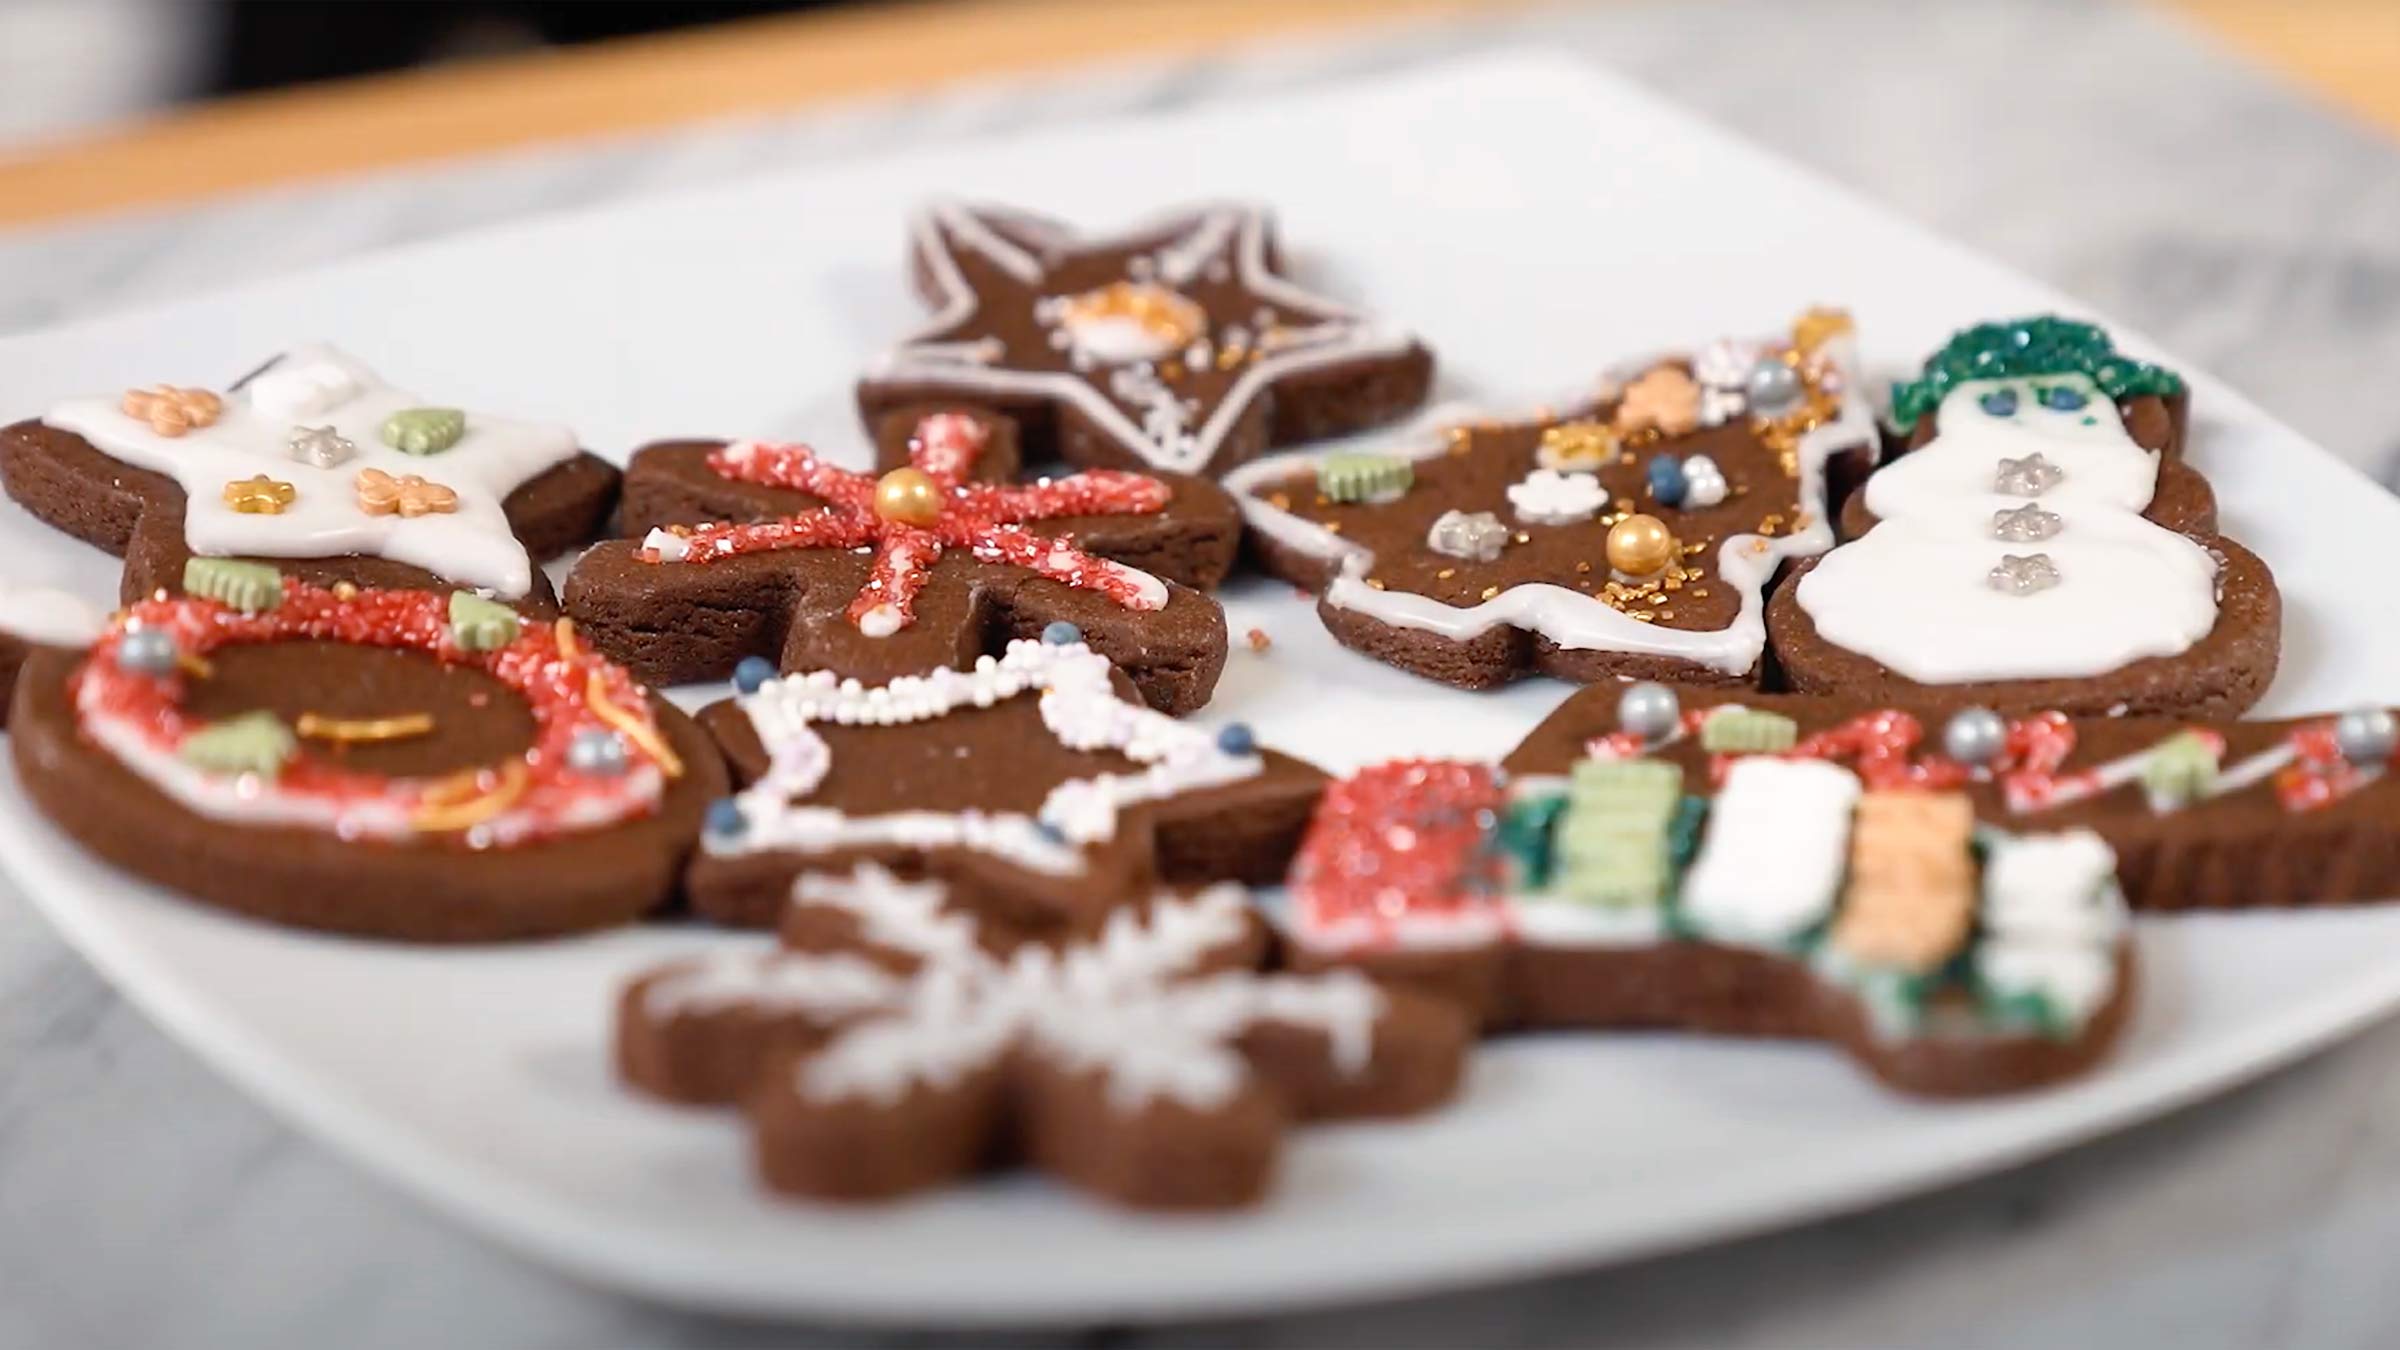 Recipe from our chefs: Cocoa cut-out holiday cookies